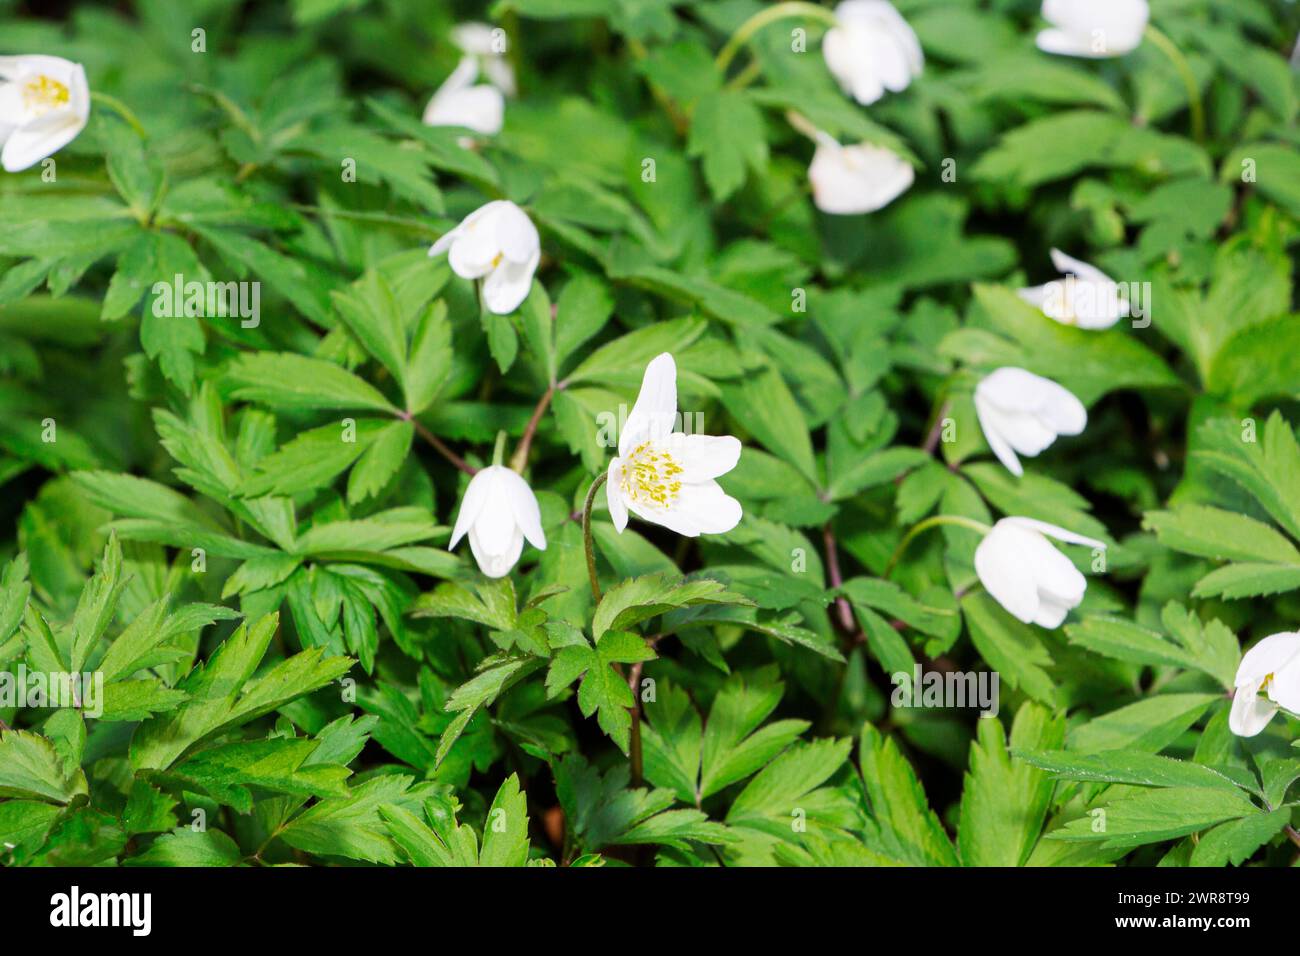 anemone flower, close-up, the first forest flowers Stock Photo